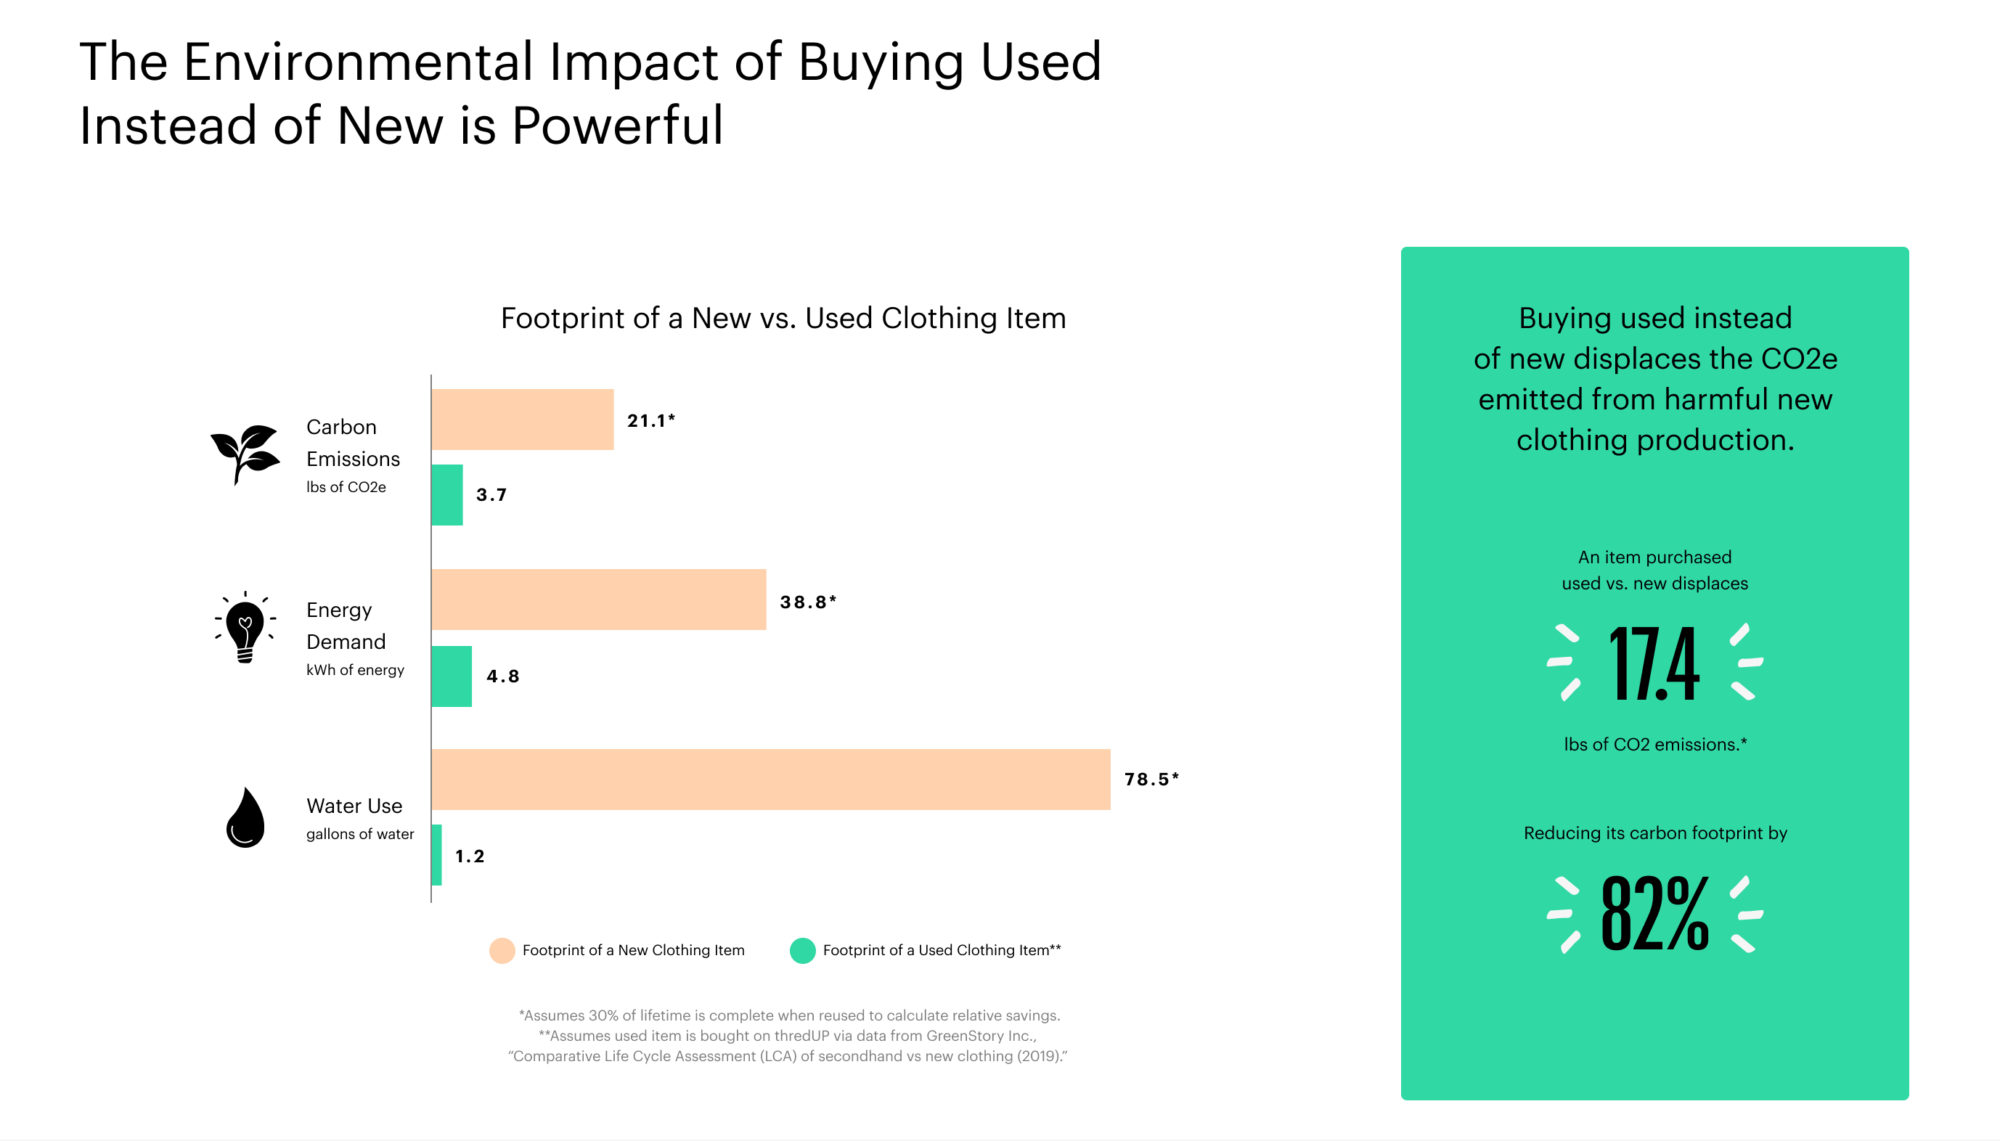 The environmental benefits of buying secondhand are significant